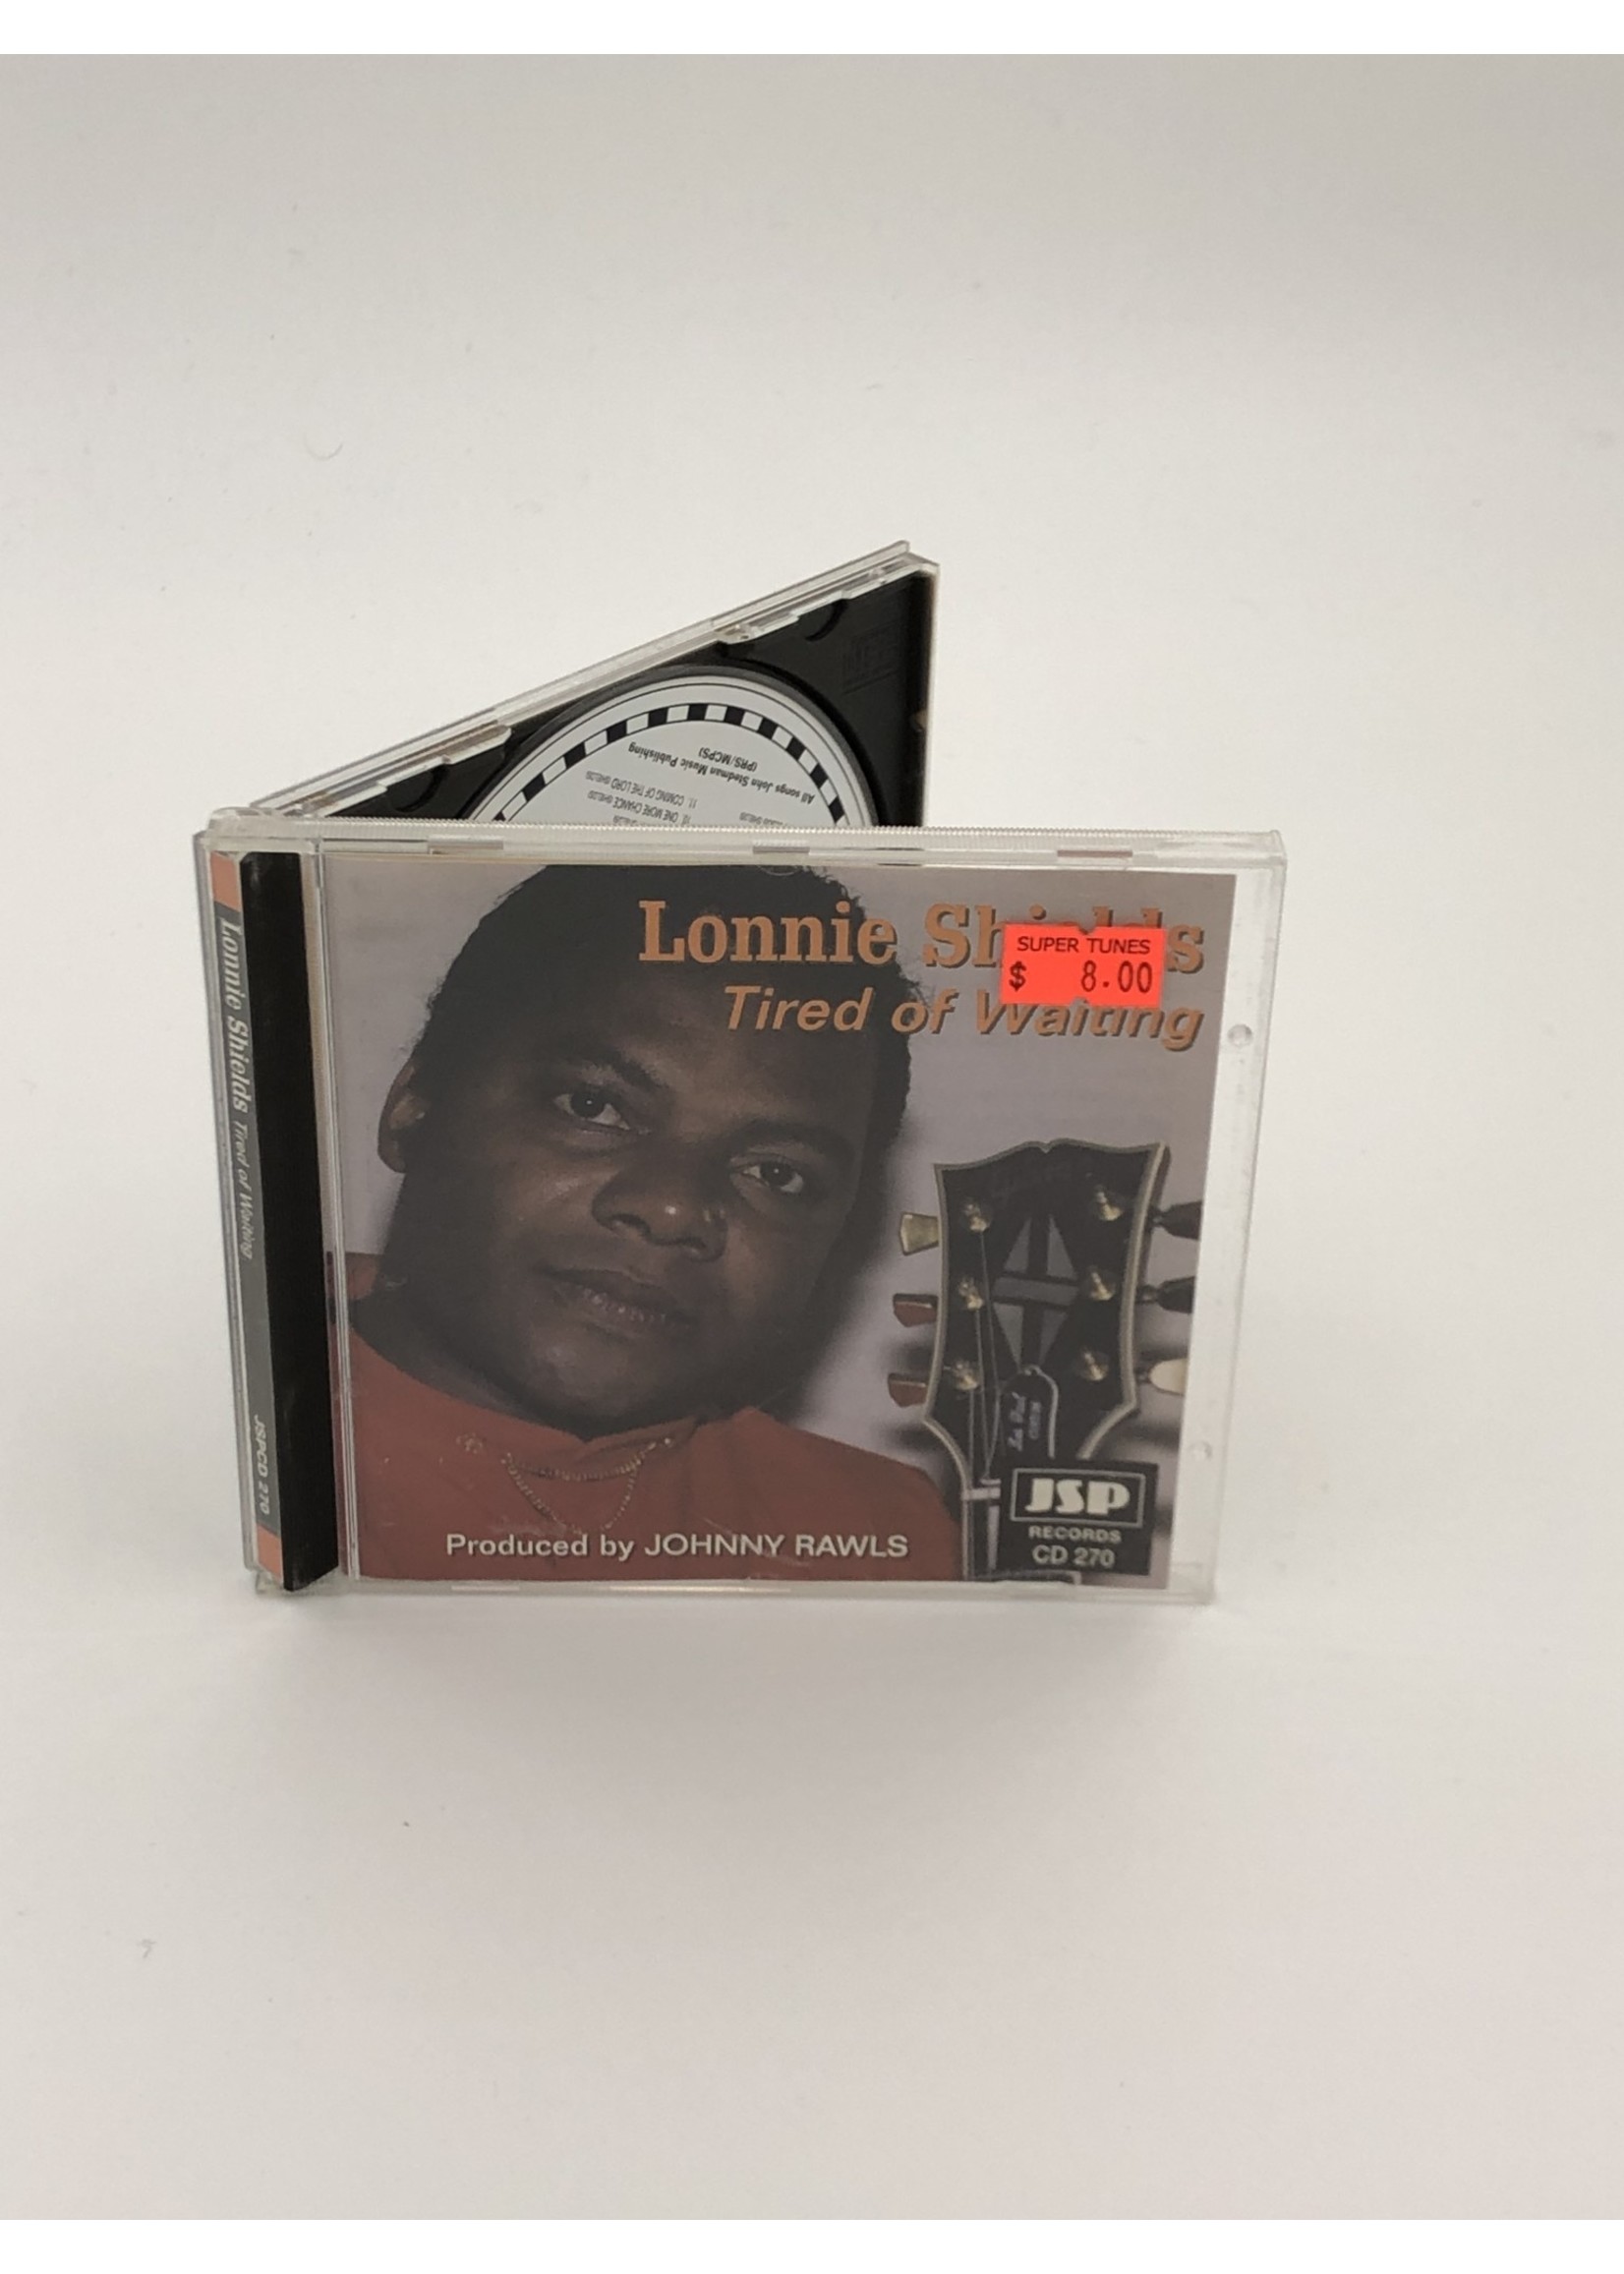 CD Lonnie Shields: Tired of Waiting CD